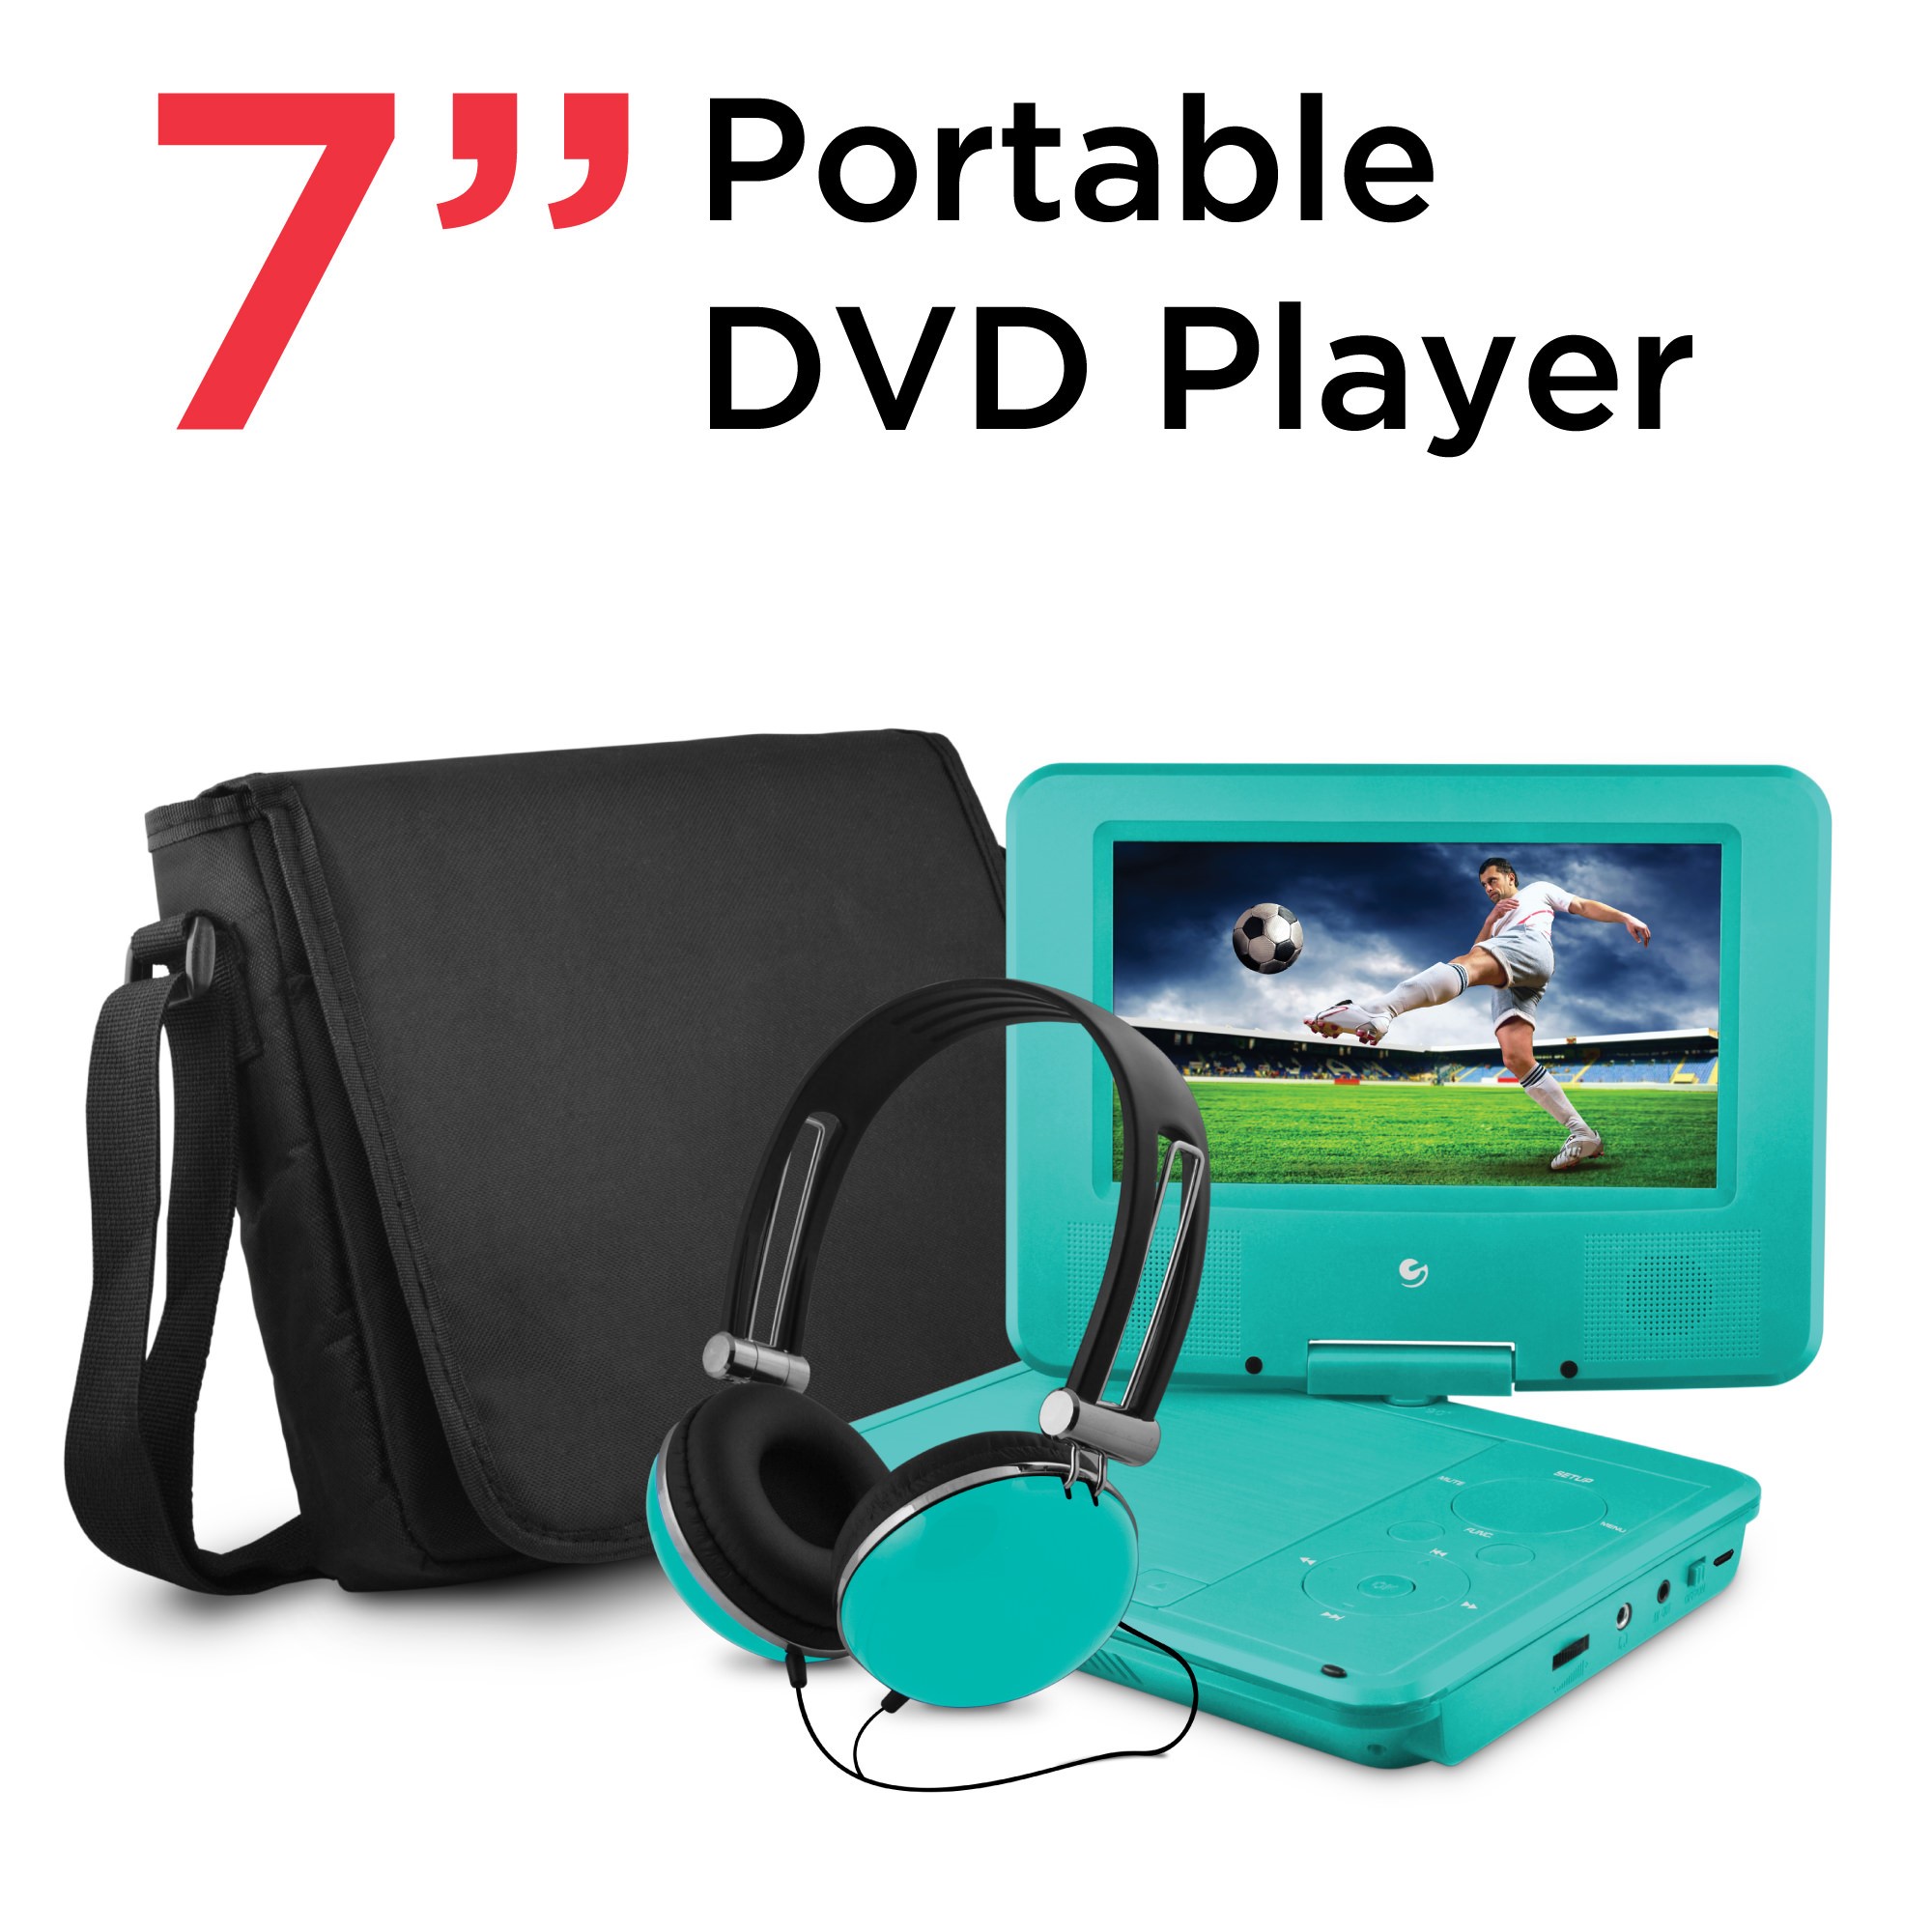 Ematic 7" Portable DVD Player with Matching Headphones and Bag - EPD707tl - image 1 of 2